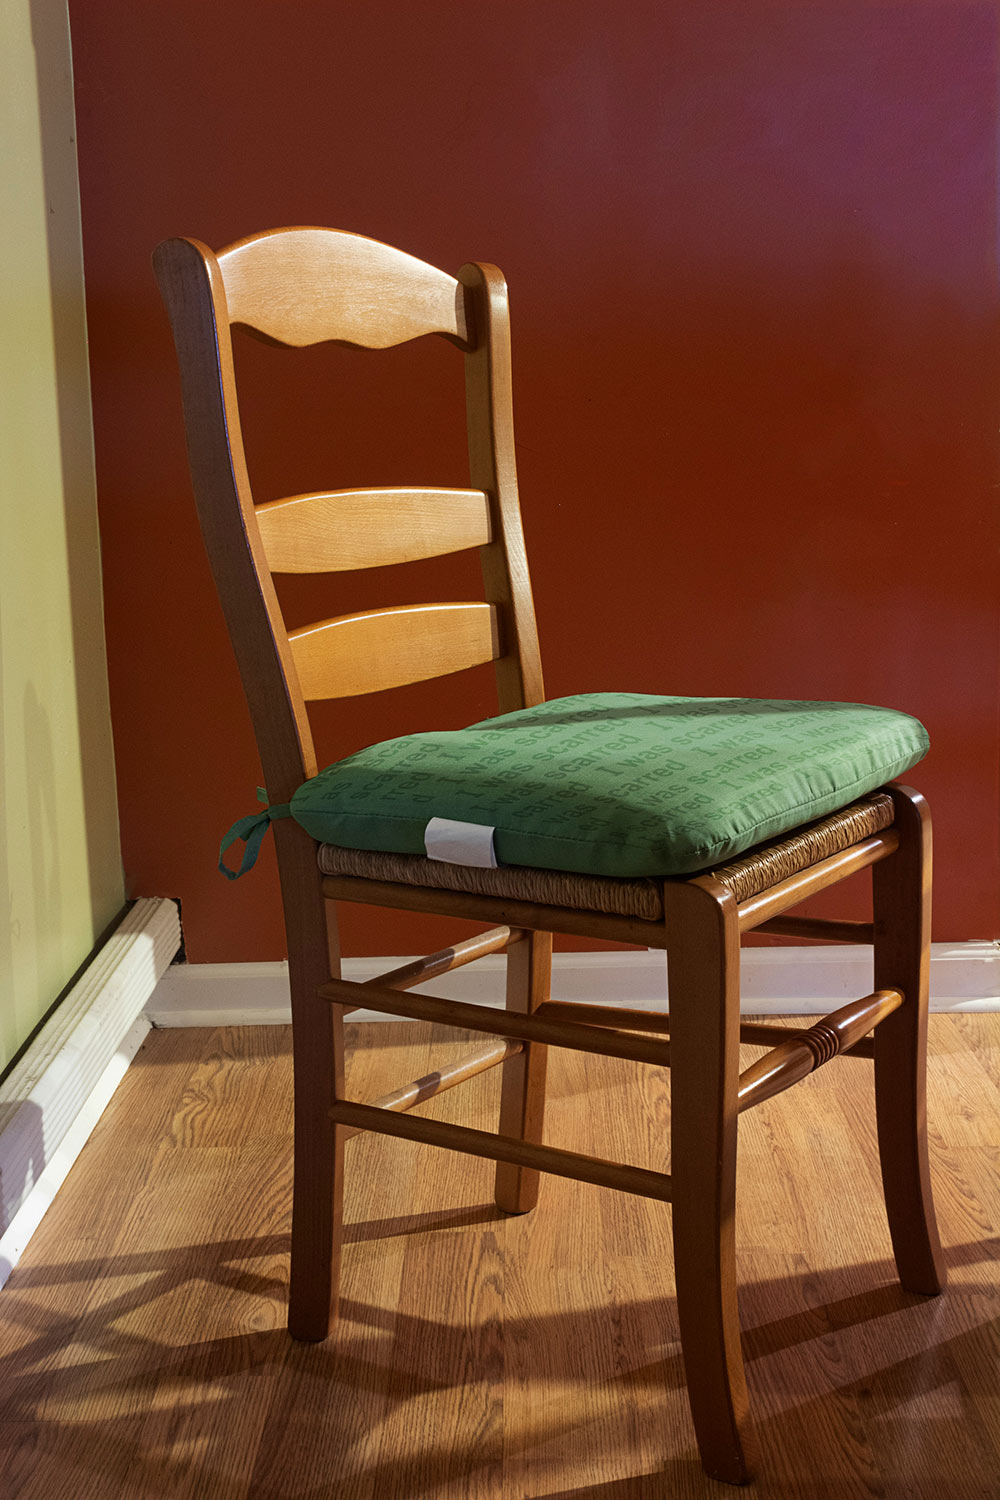 wooden chair in corner with green pillow on it "I was scarred" written on pillow